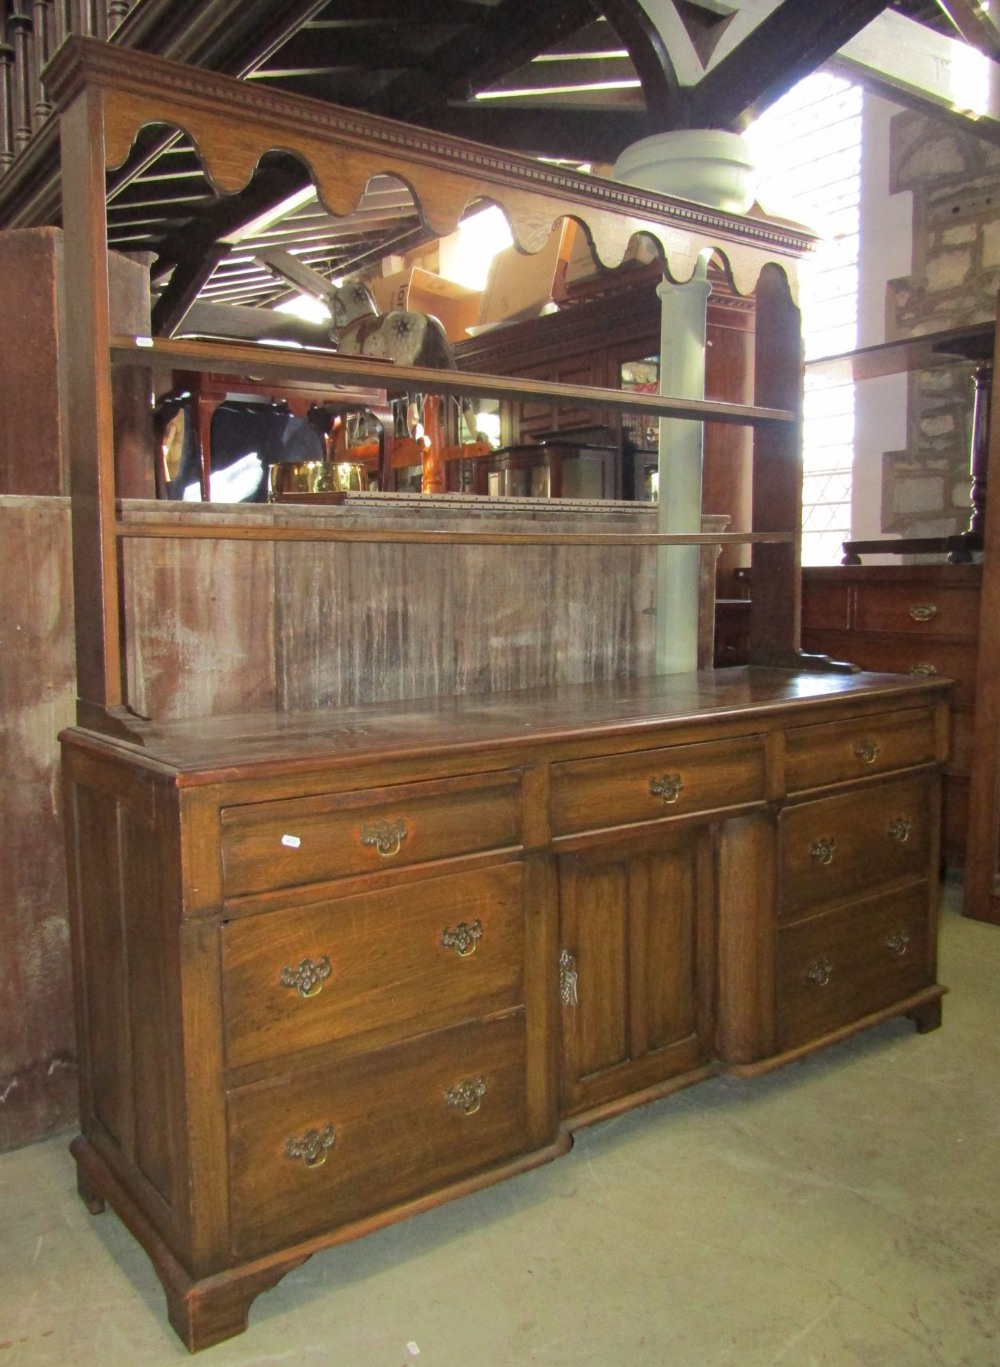 A late 19th century oak dresser and plate rack, the lower section enclosed by an arrangement of